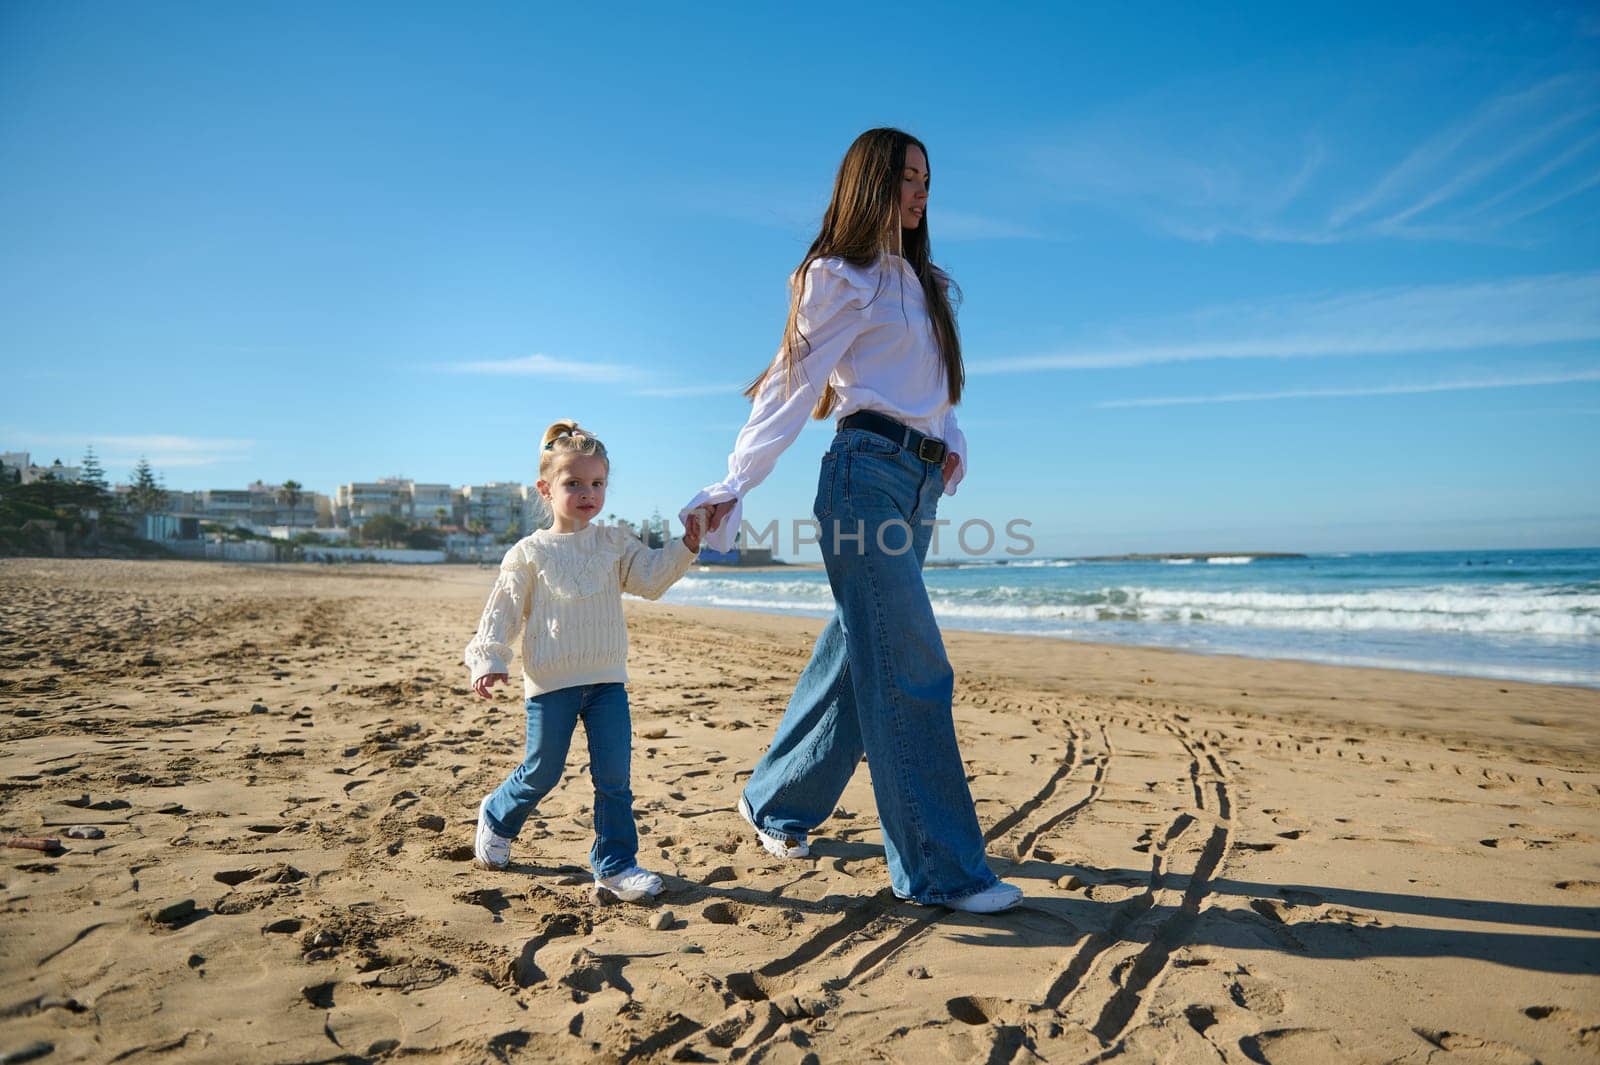 Full length portrait of a young mother and daughter, dressed in white shirts and blue jeans, holding hands and walking along the tropical beach, enjoying a happy weekend together outdoor